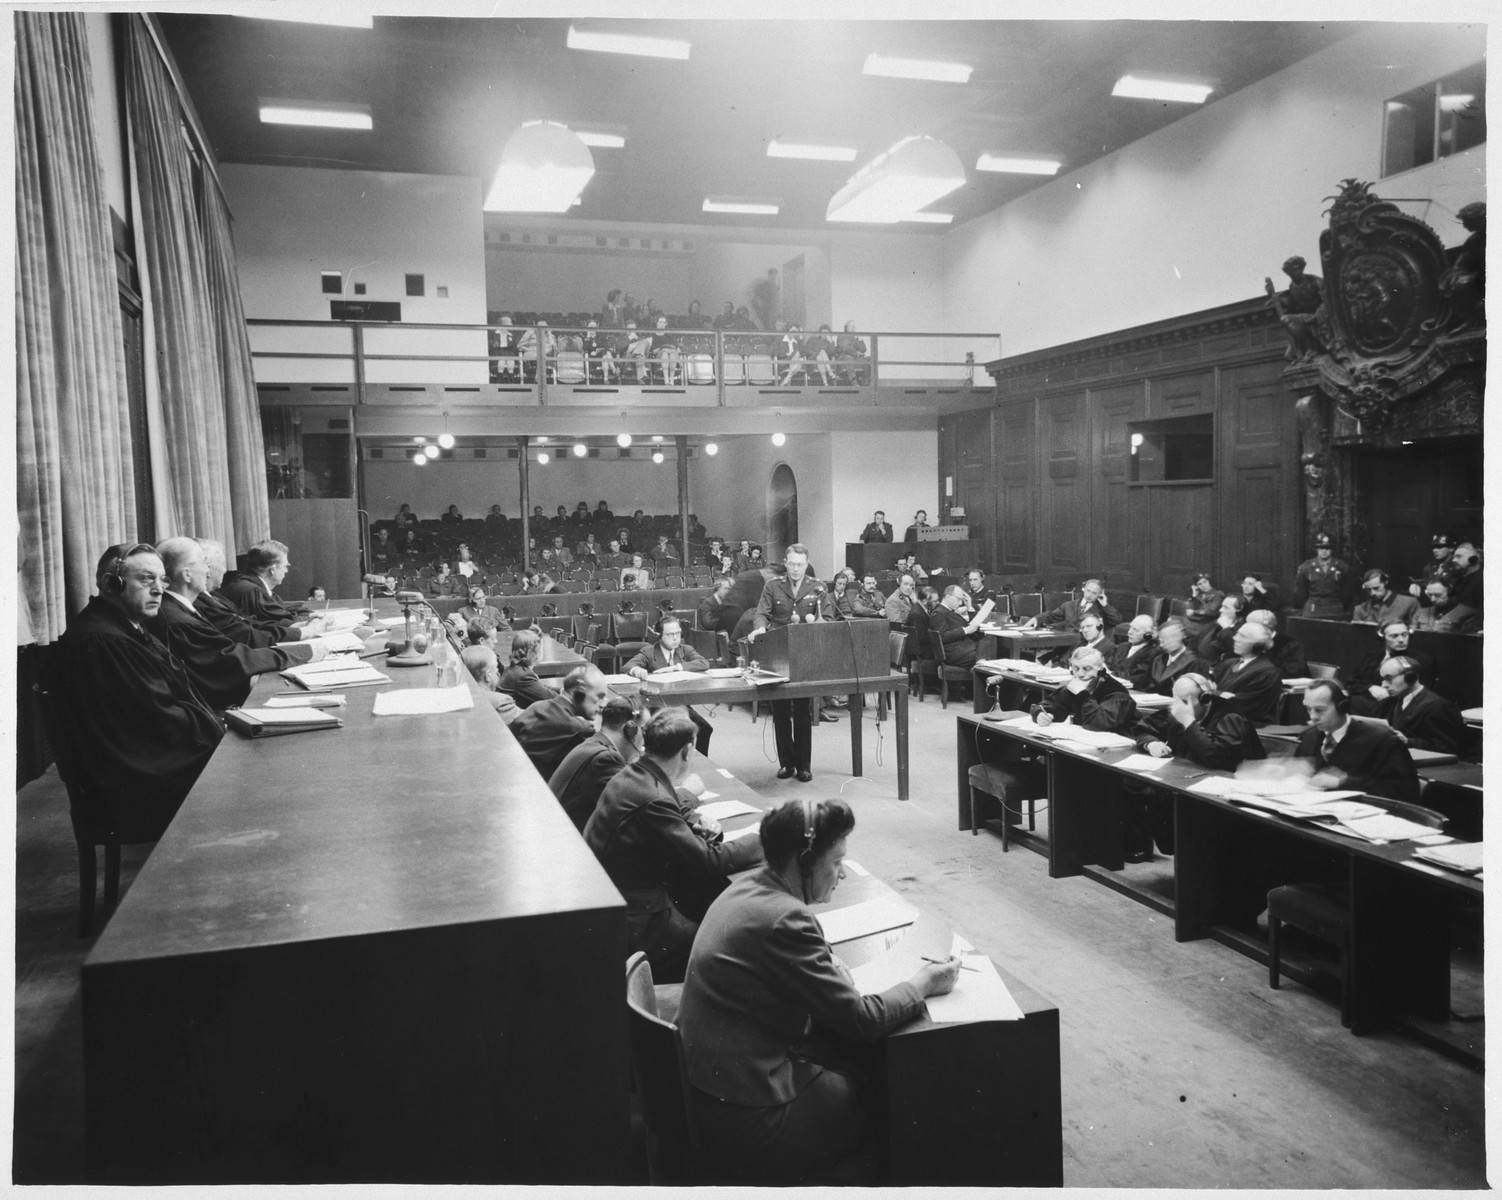 Brigadier General Telford Taylor, the Chief of Counsel for the prosecution, addresses the court during a session of the Doctors Trial.